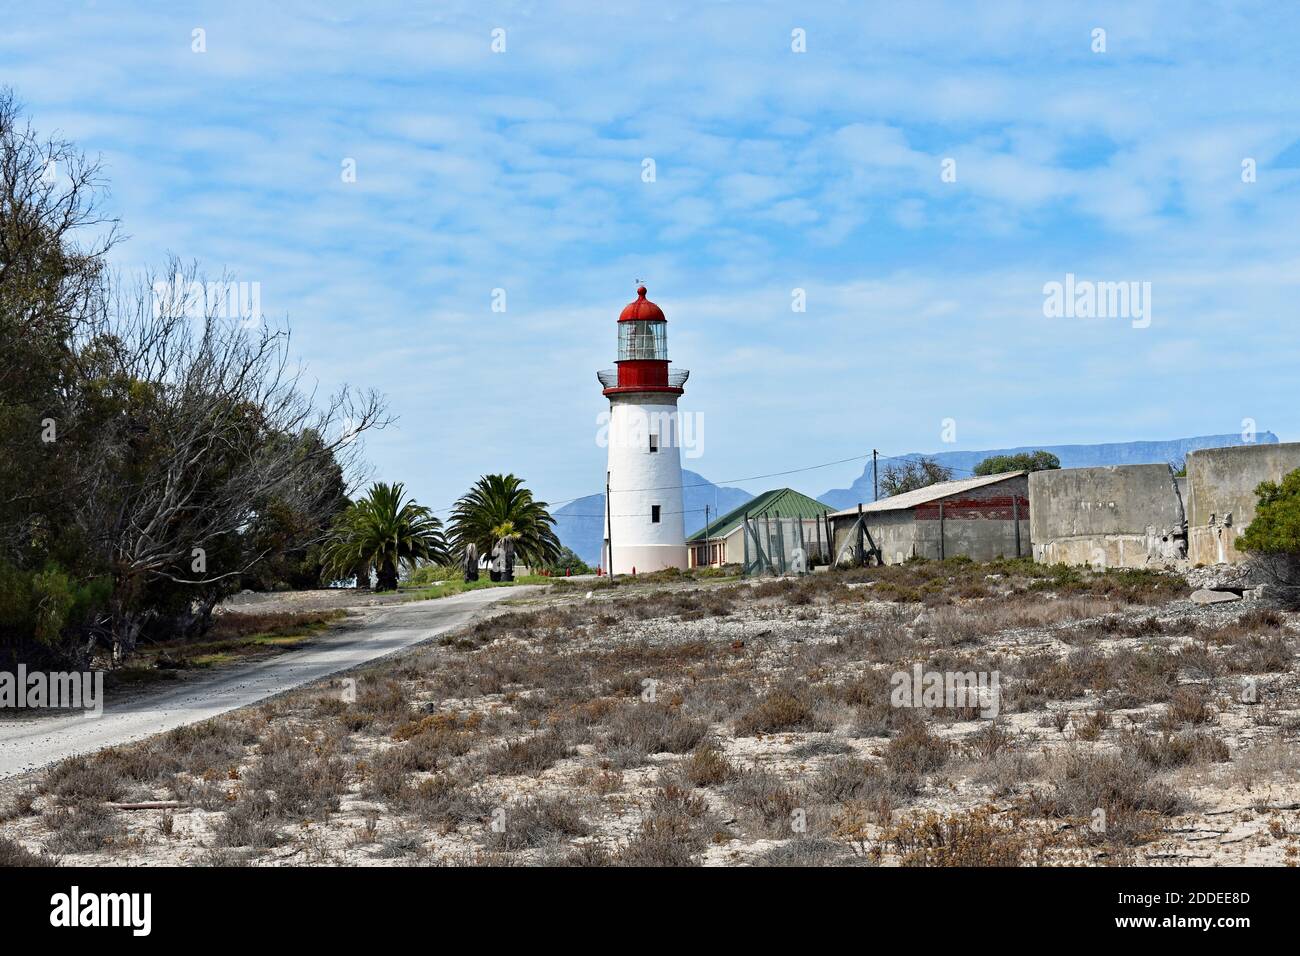 The lighthouse on Robben Island, Caoe Town, South Africa. Table Mountain can be seen behind the lighthouse across Table Bay. Stock Photo